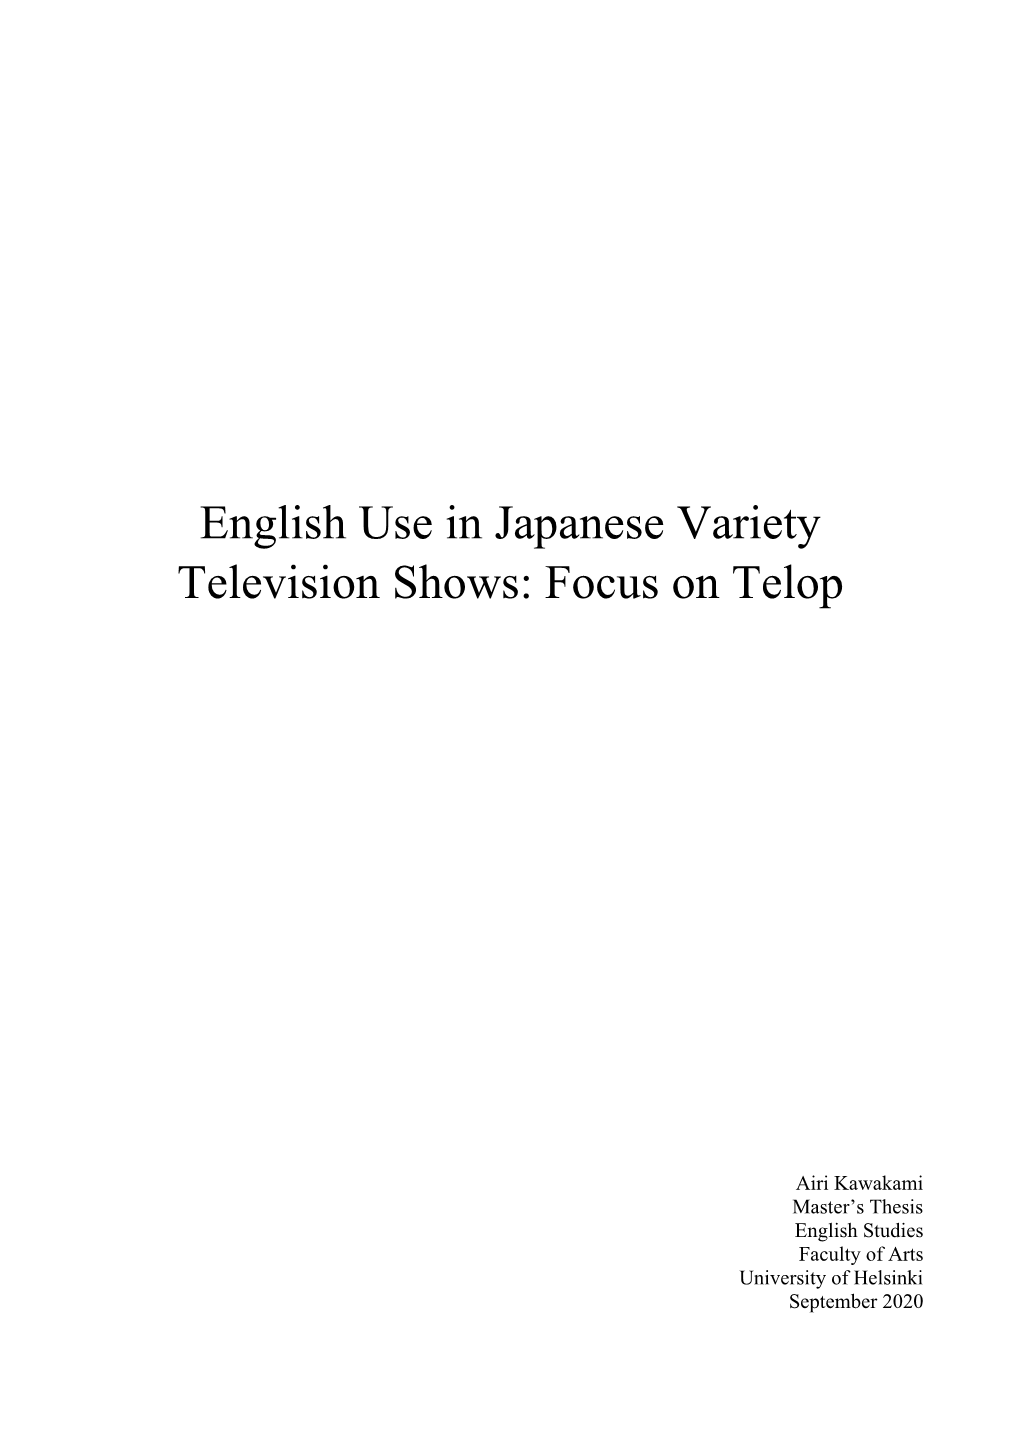 English Use in Japanese Variety Television Shows: Focus on Telop